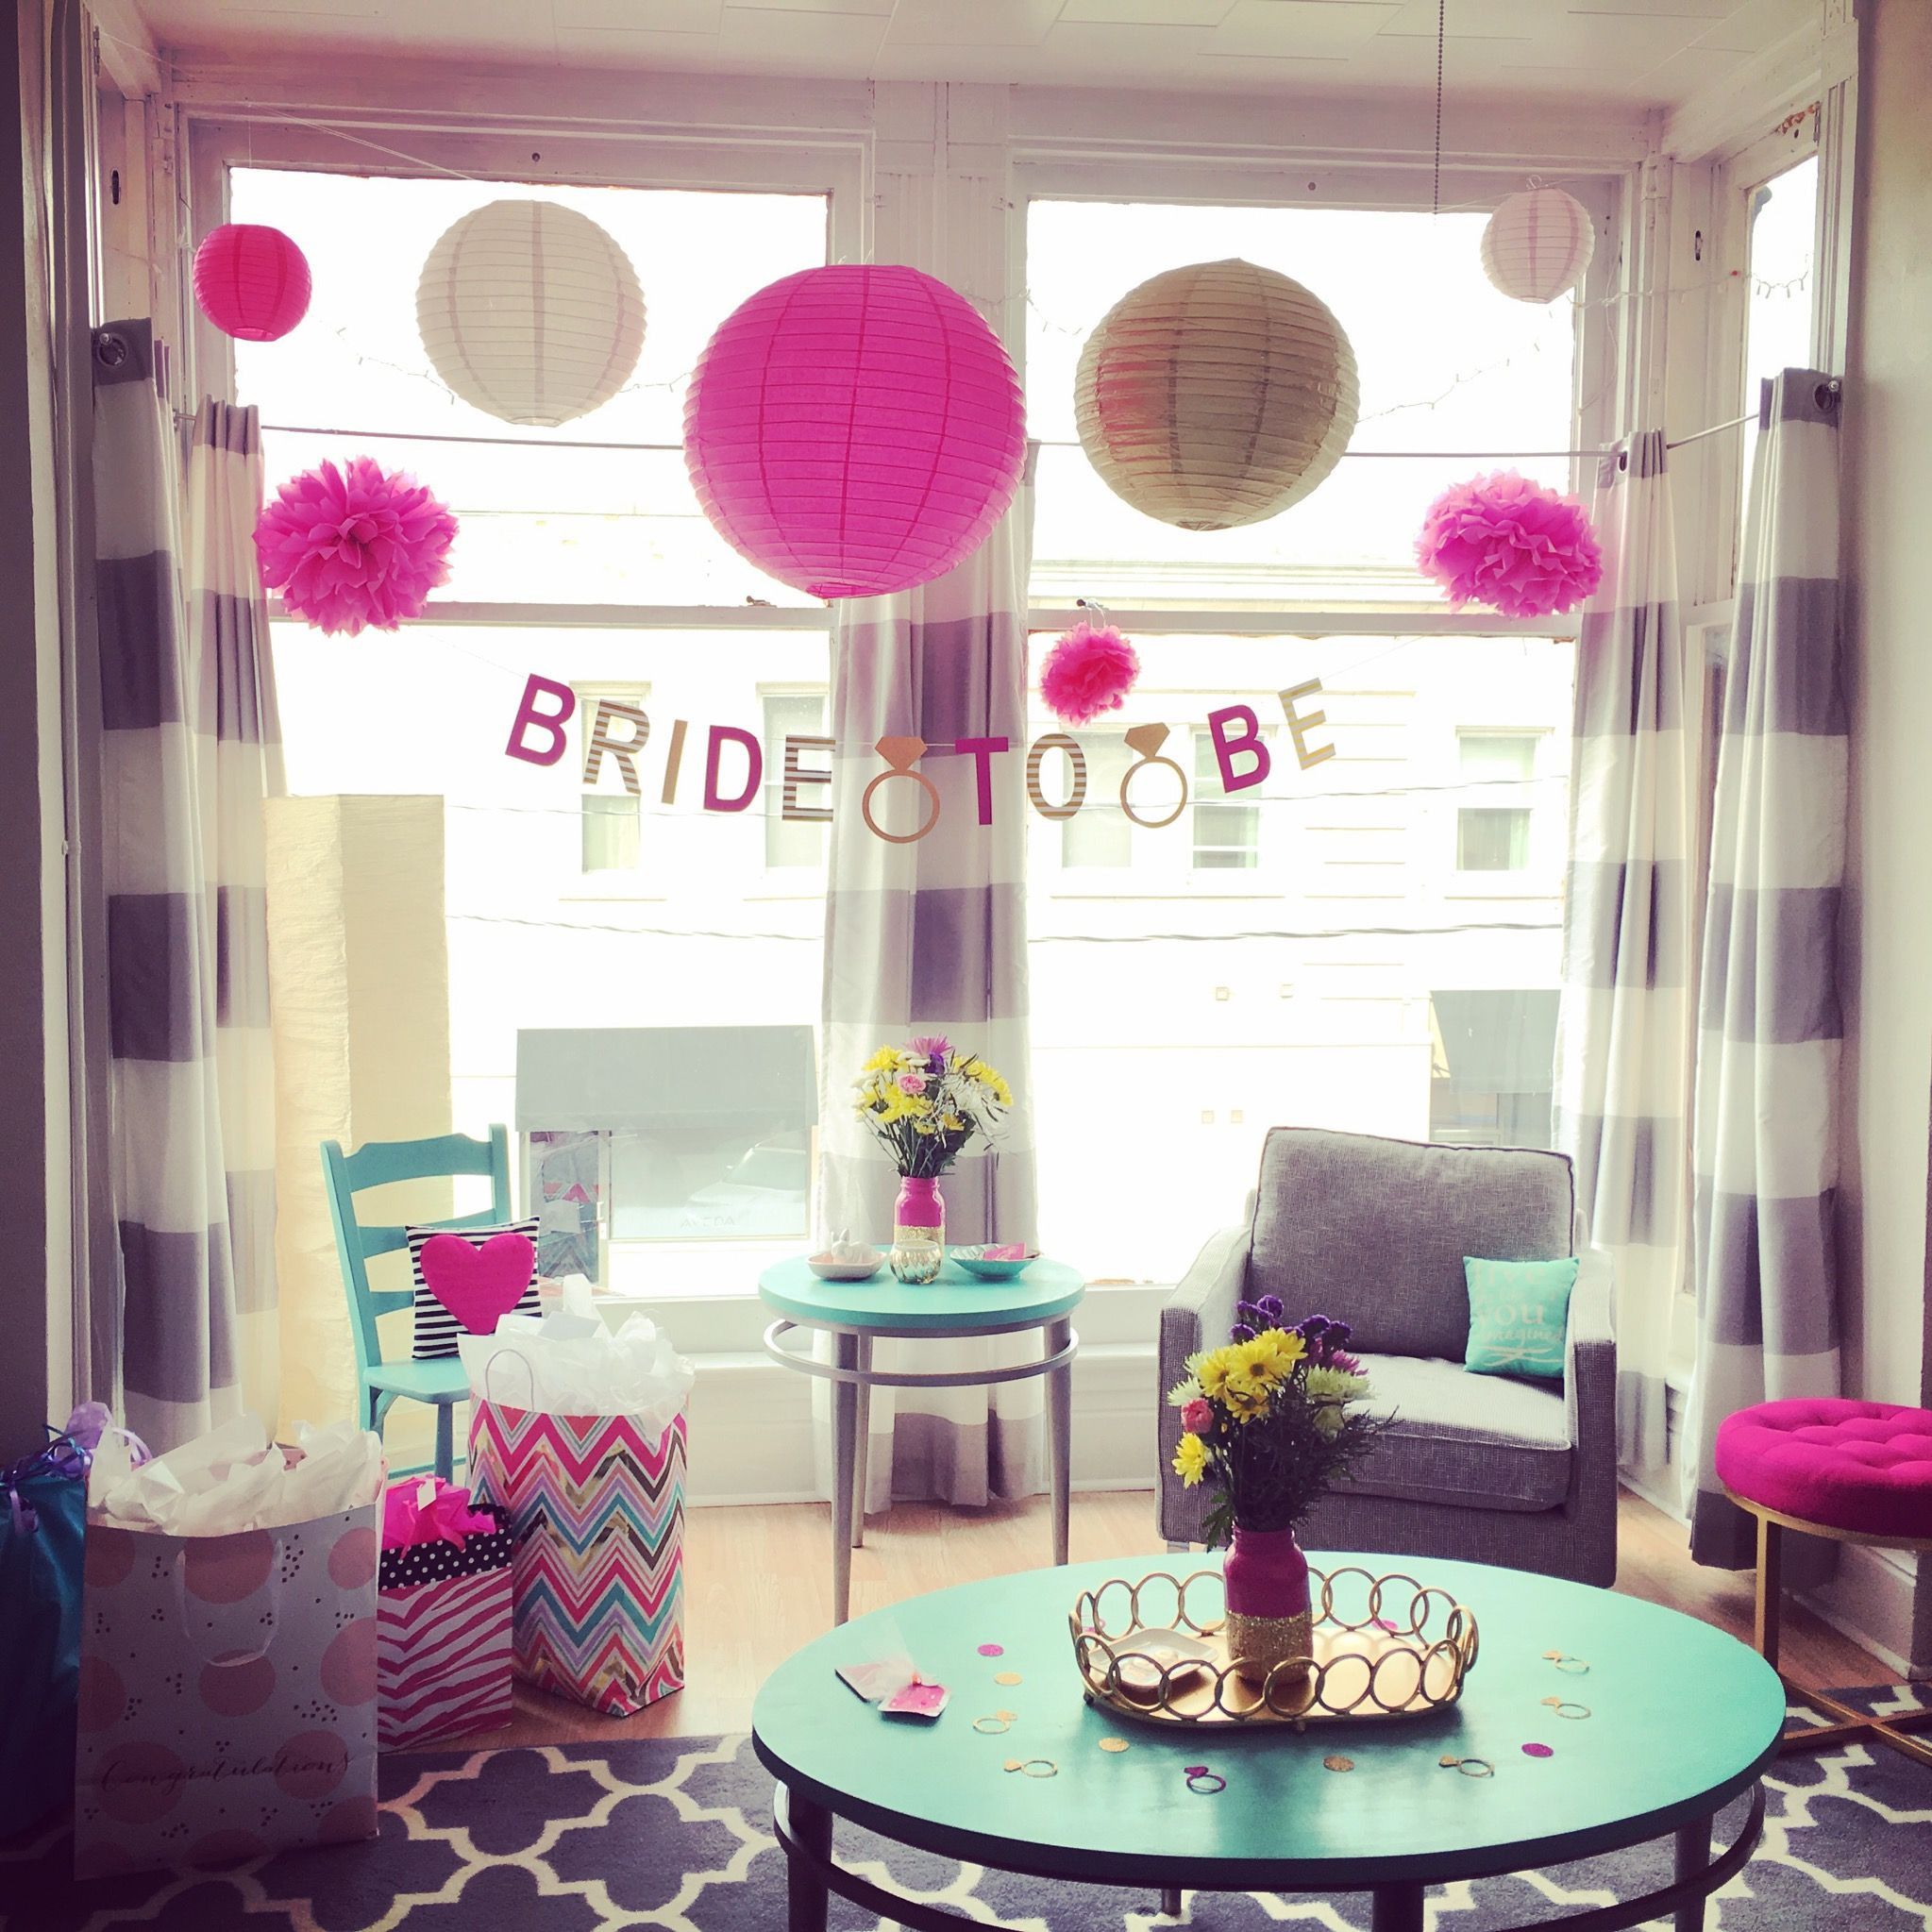 Bachelorette Party Game Ideas At Home
 Bridal Shower Bachelorette Party Decorations at home